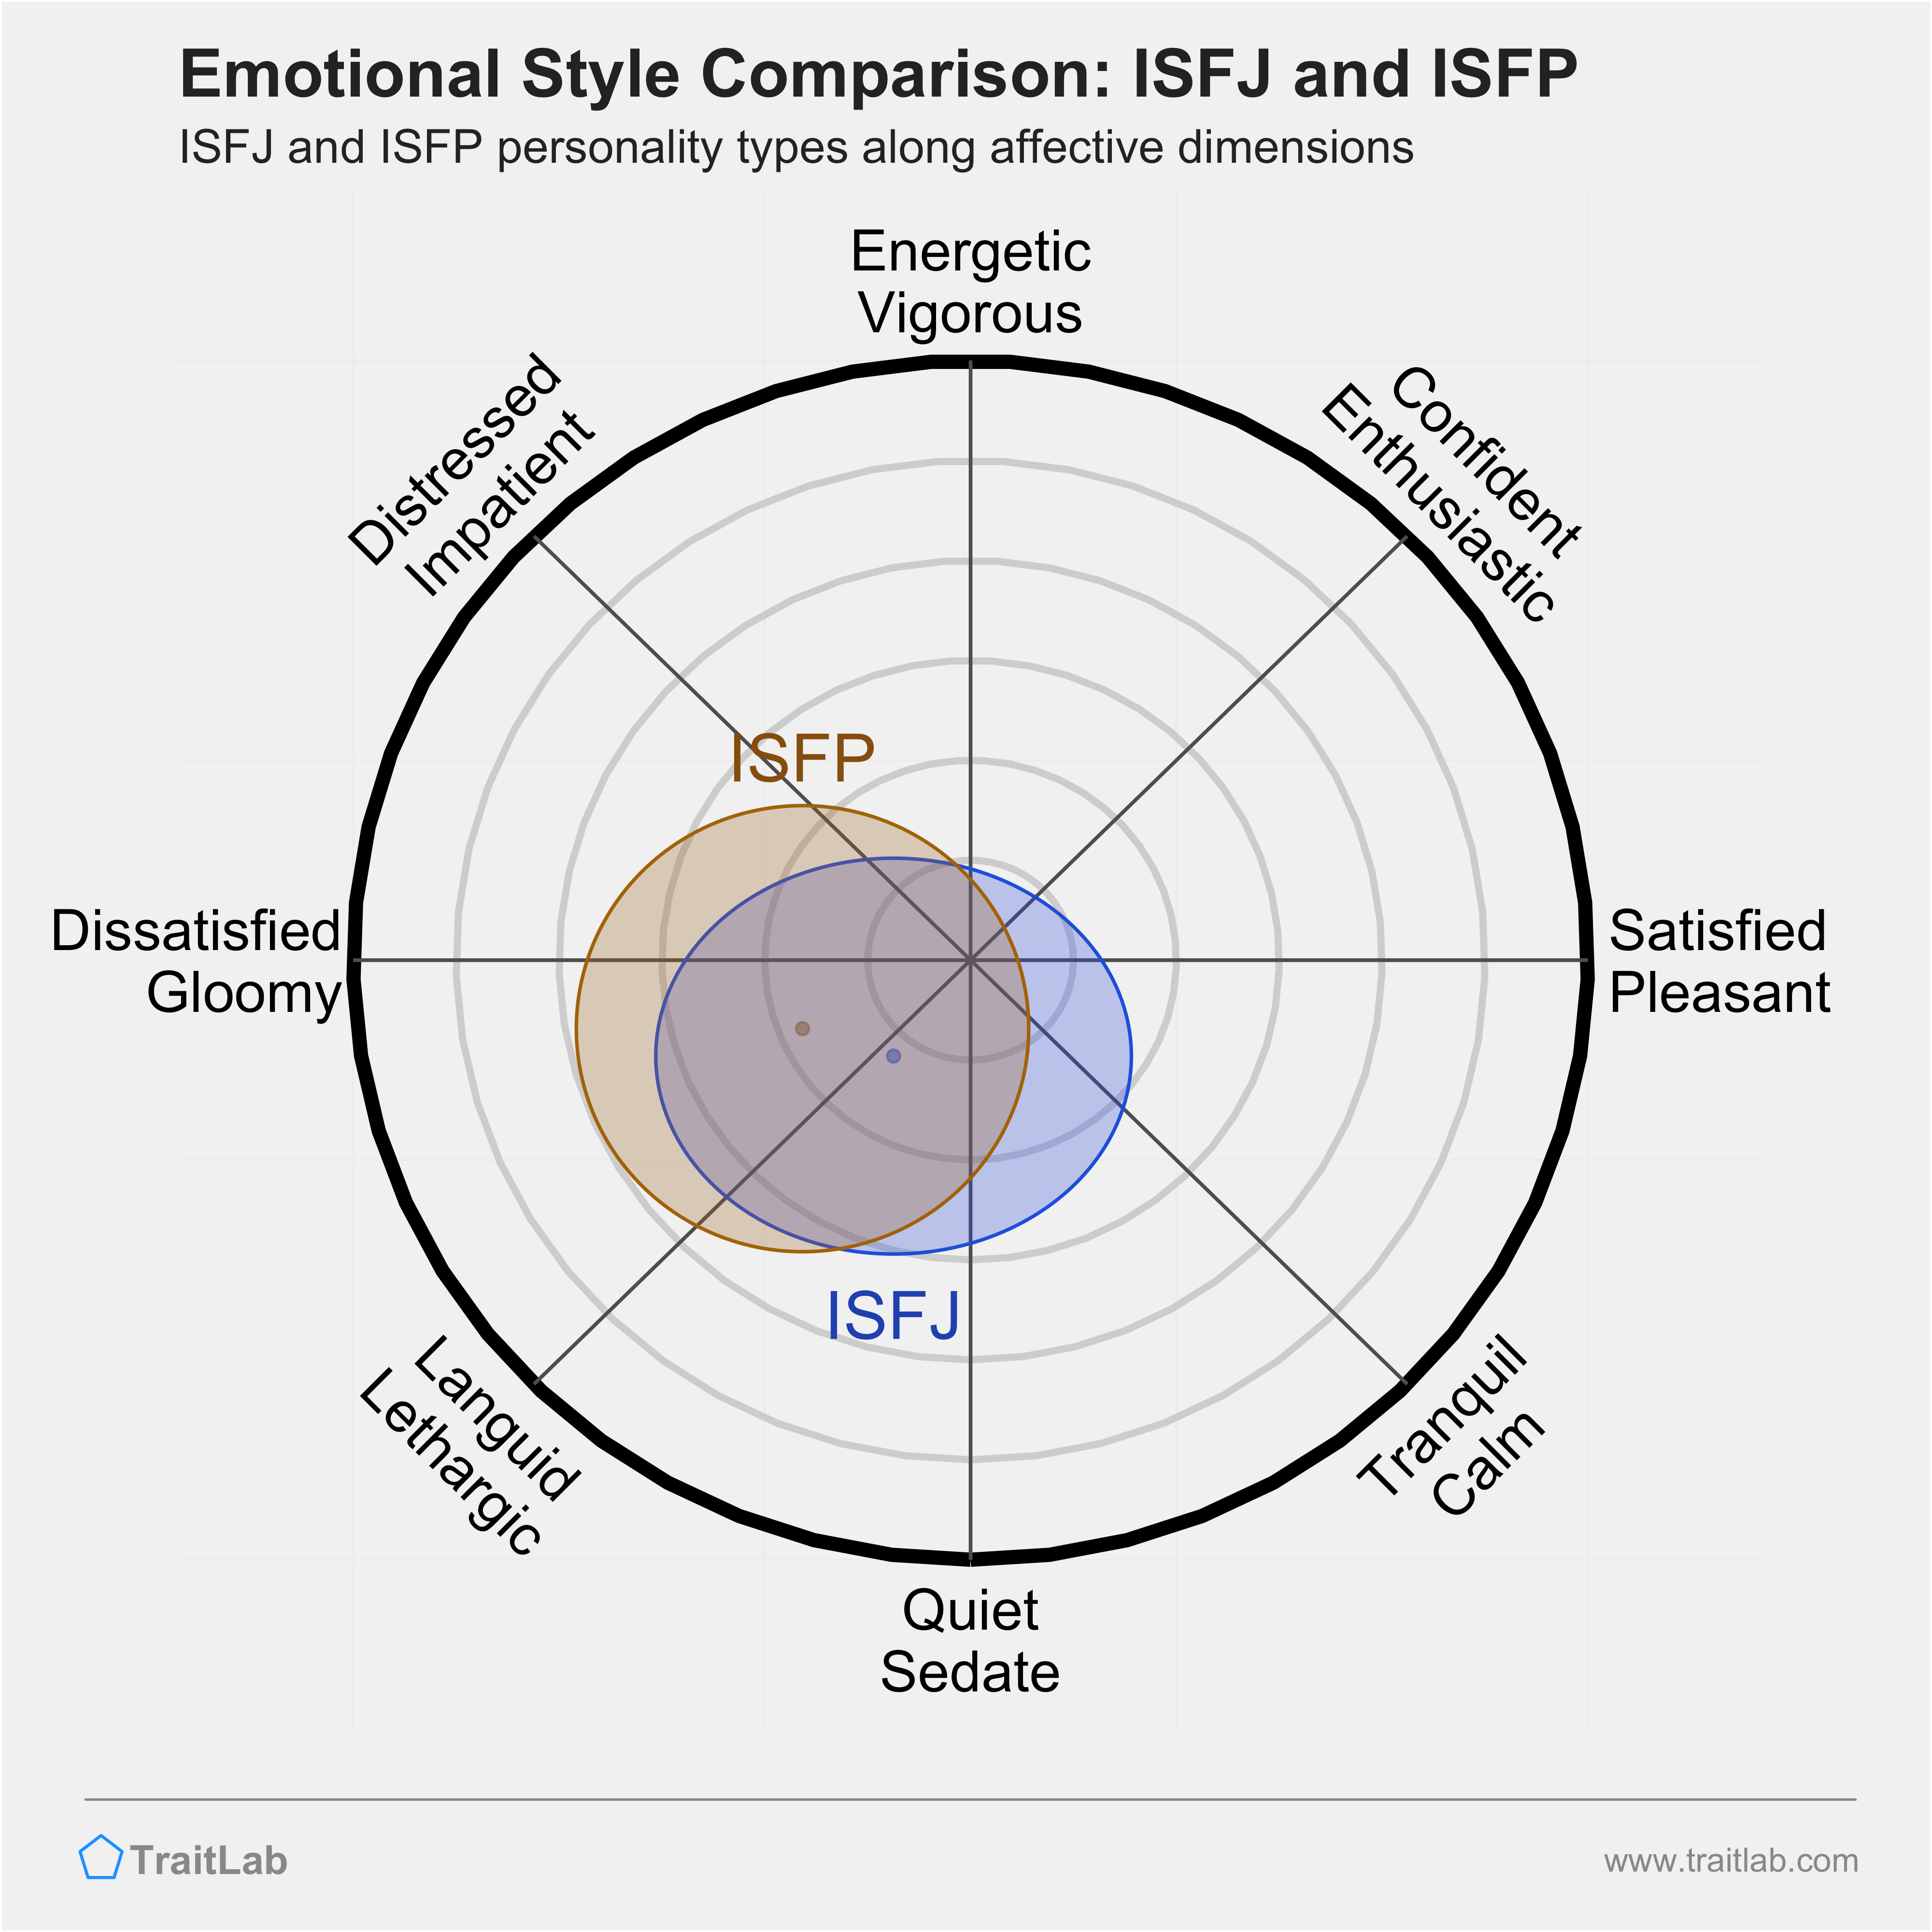 ISFJ and ISFP comparison across emotional (affective) dimensions